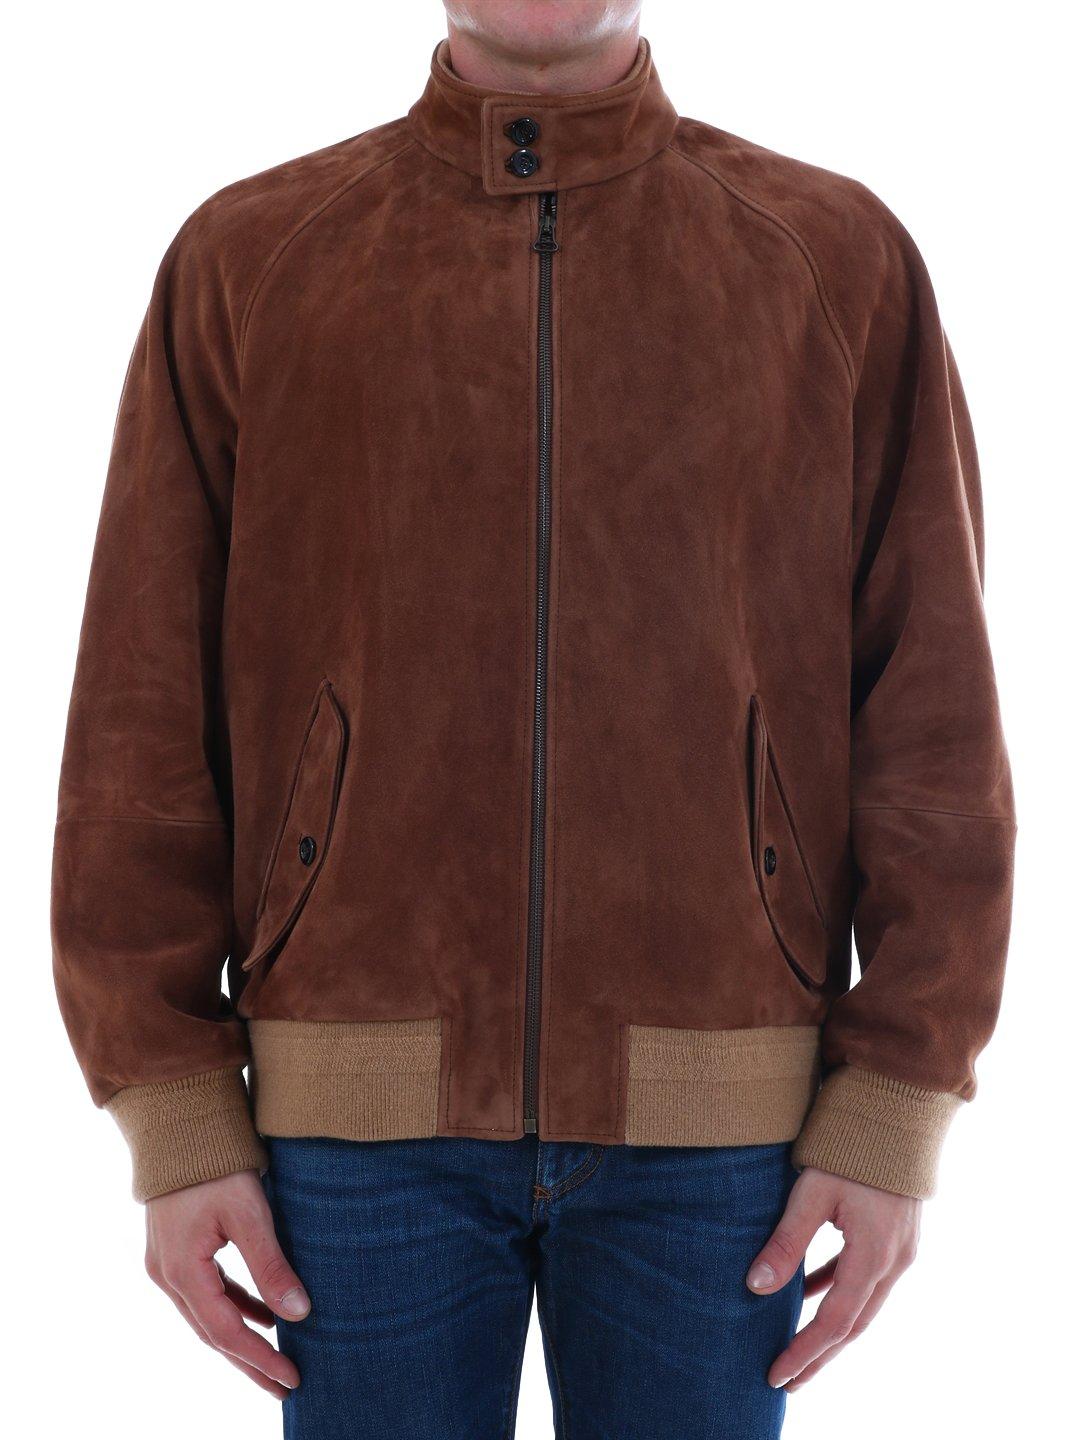 Gucci Suede Bomber Jacket in Brown for Men - Save 25% - Lyst